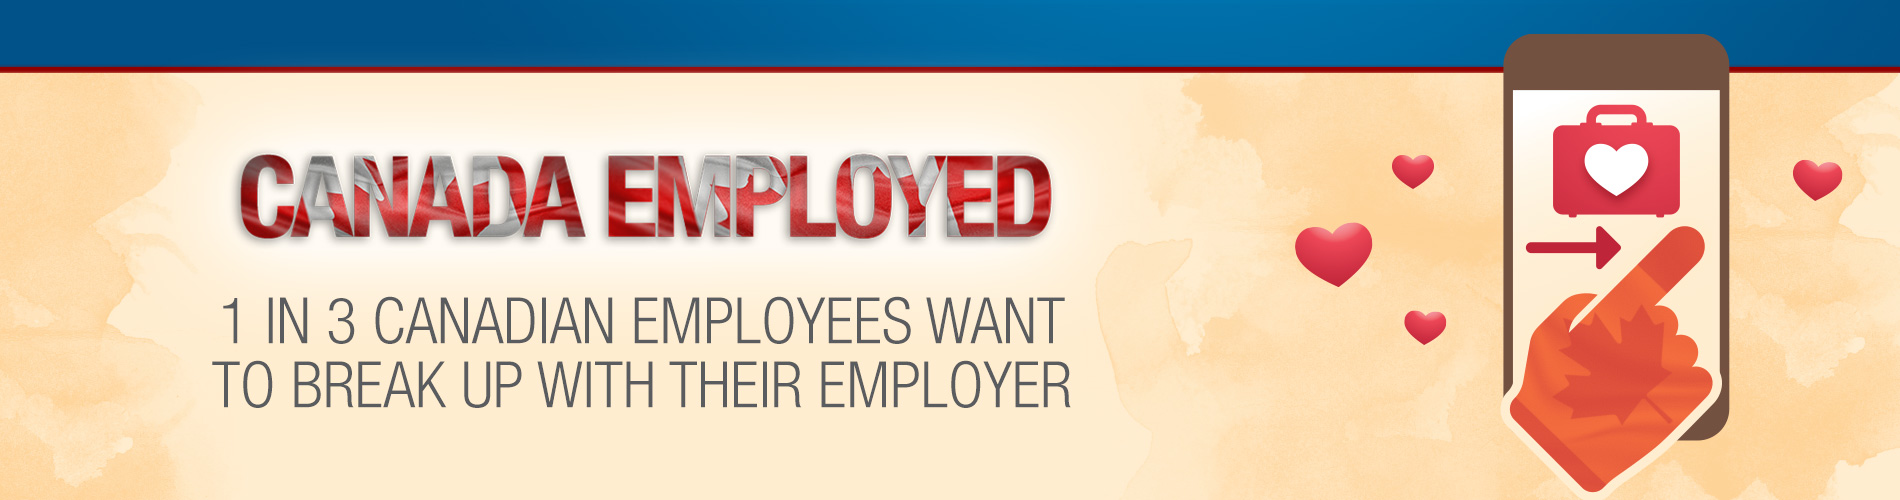 2-14-24 New Job to Love - Canada Employed